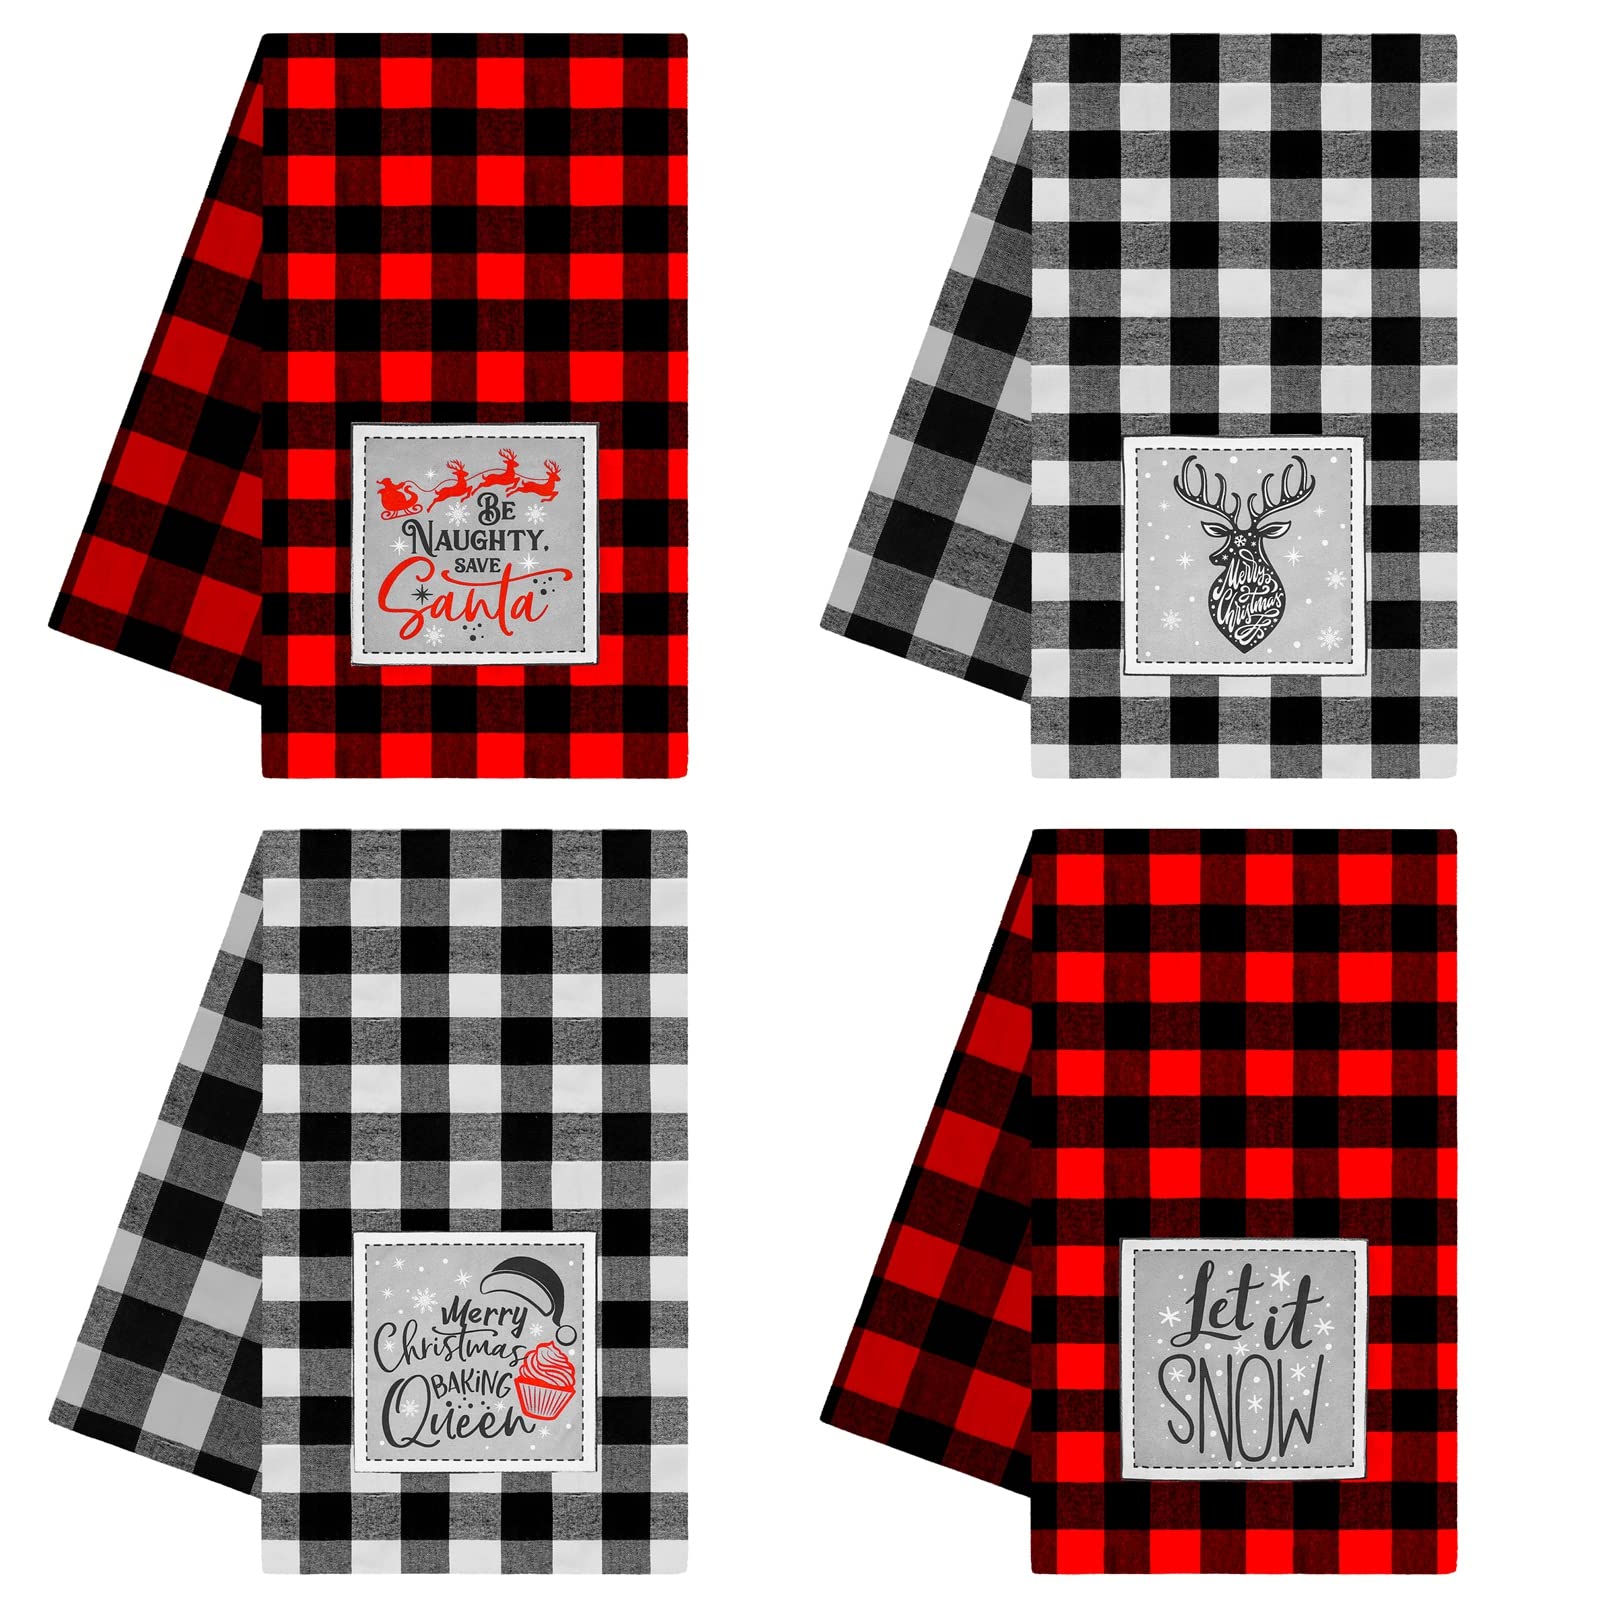 Ruisita 4 Pack Buffalo Plaid Christmas Cotton Kitchen Towels Oversized Embroidered Xmas Decorative Dish Towels 28 x 18 Inch for Winter Holiday Kitchen Drying Cooking